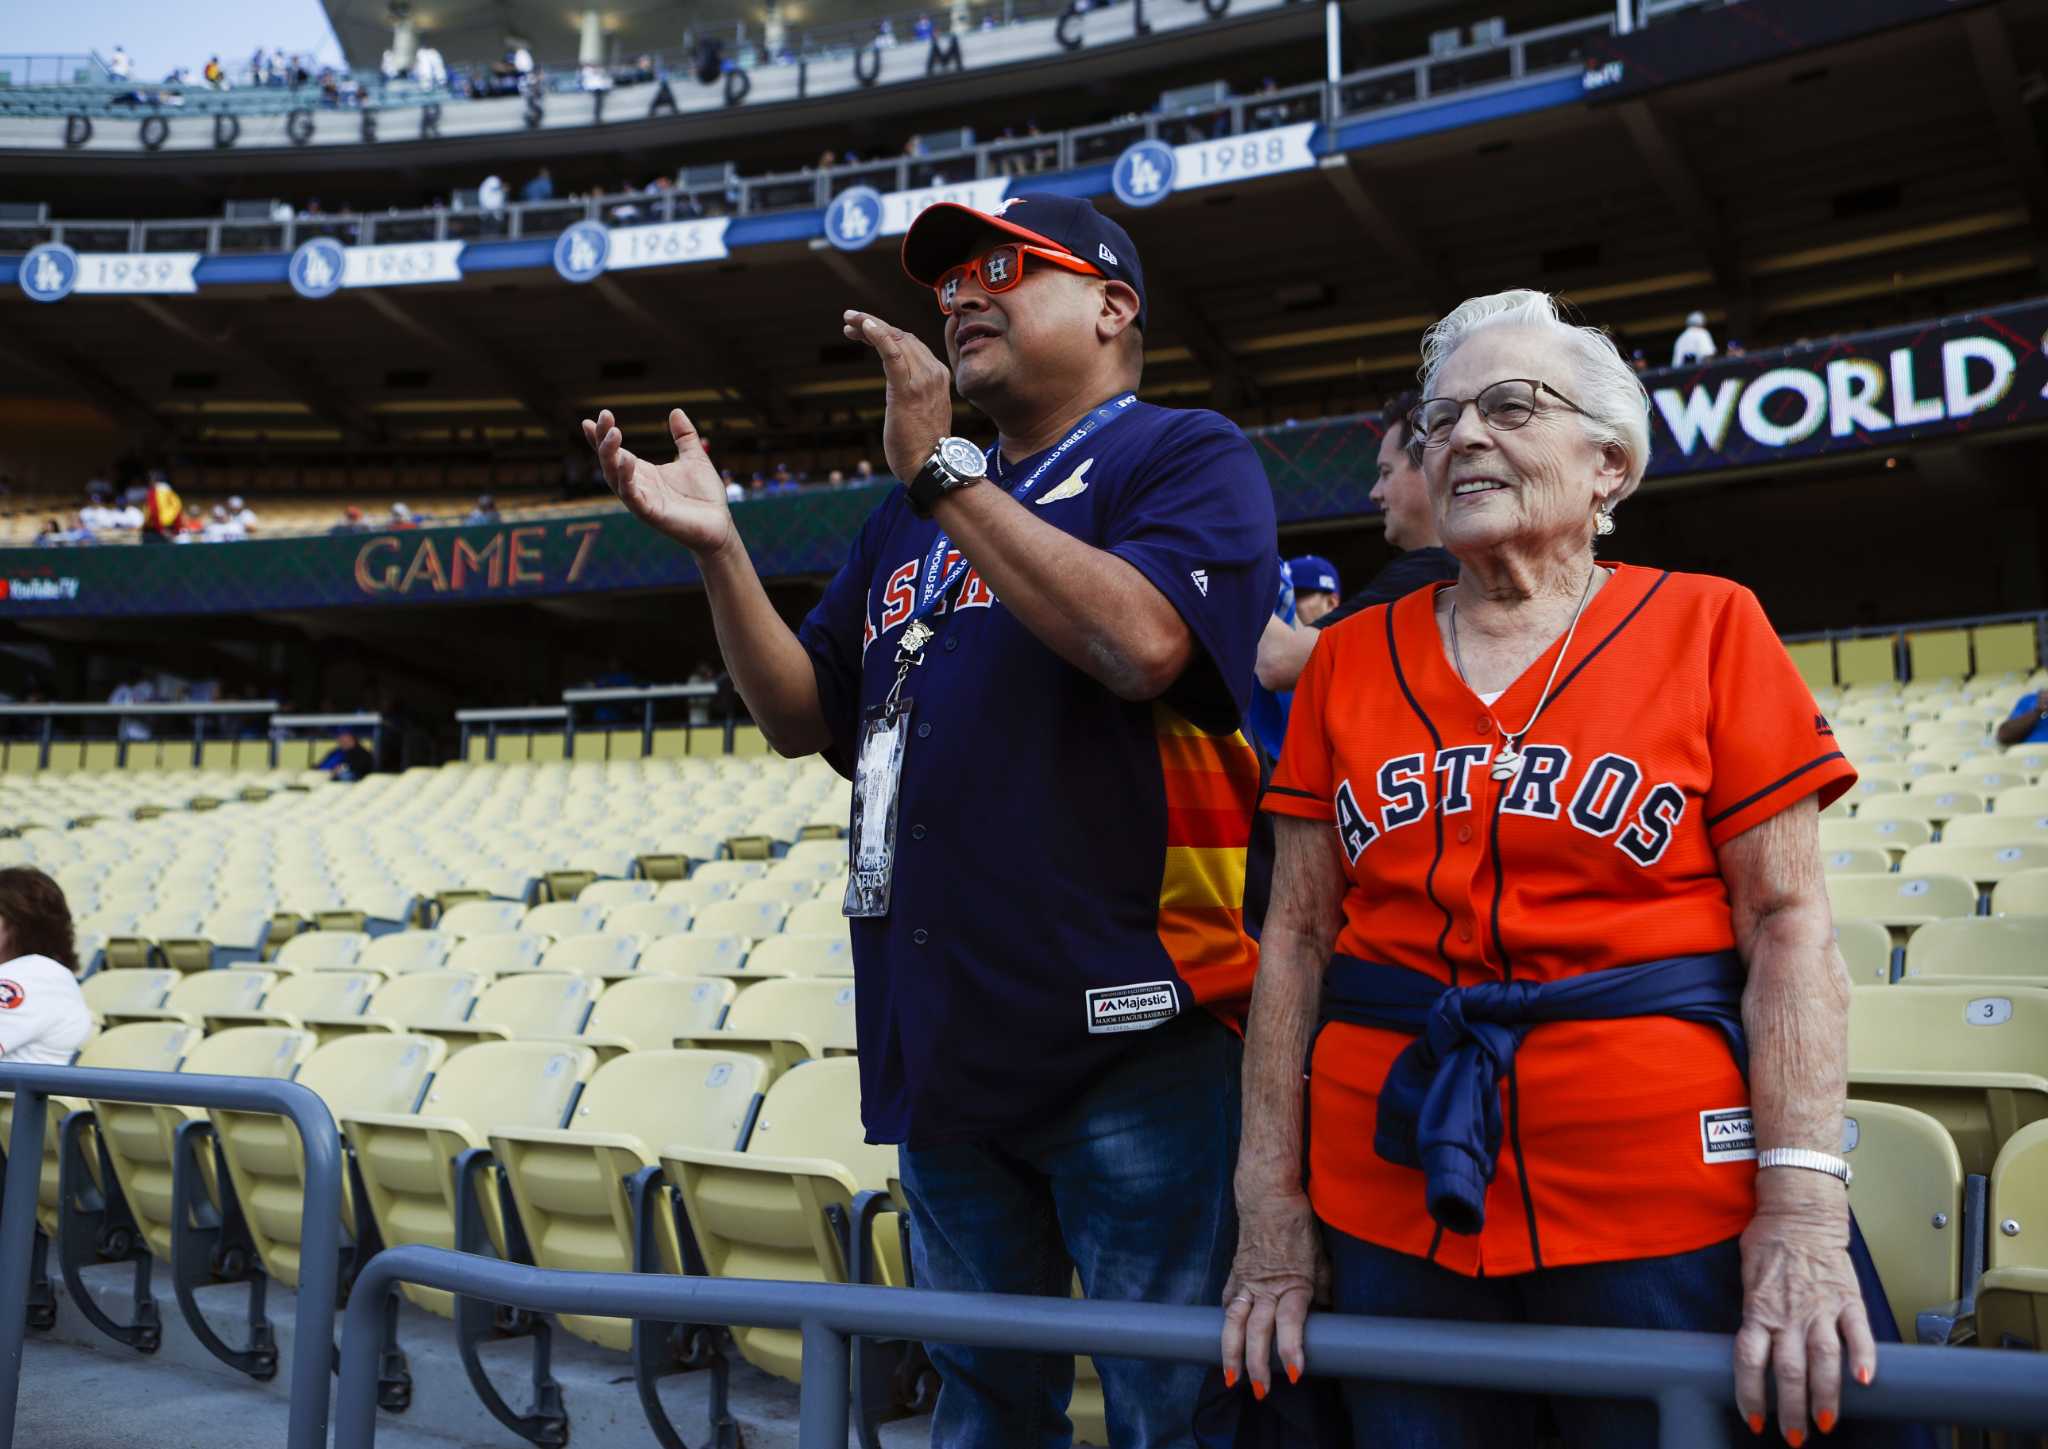 Astros fan maxed out credit cards to go to all 7 World Series